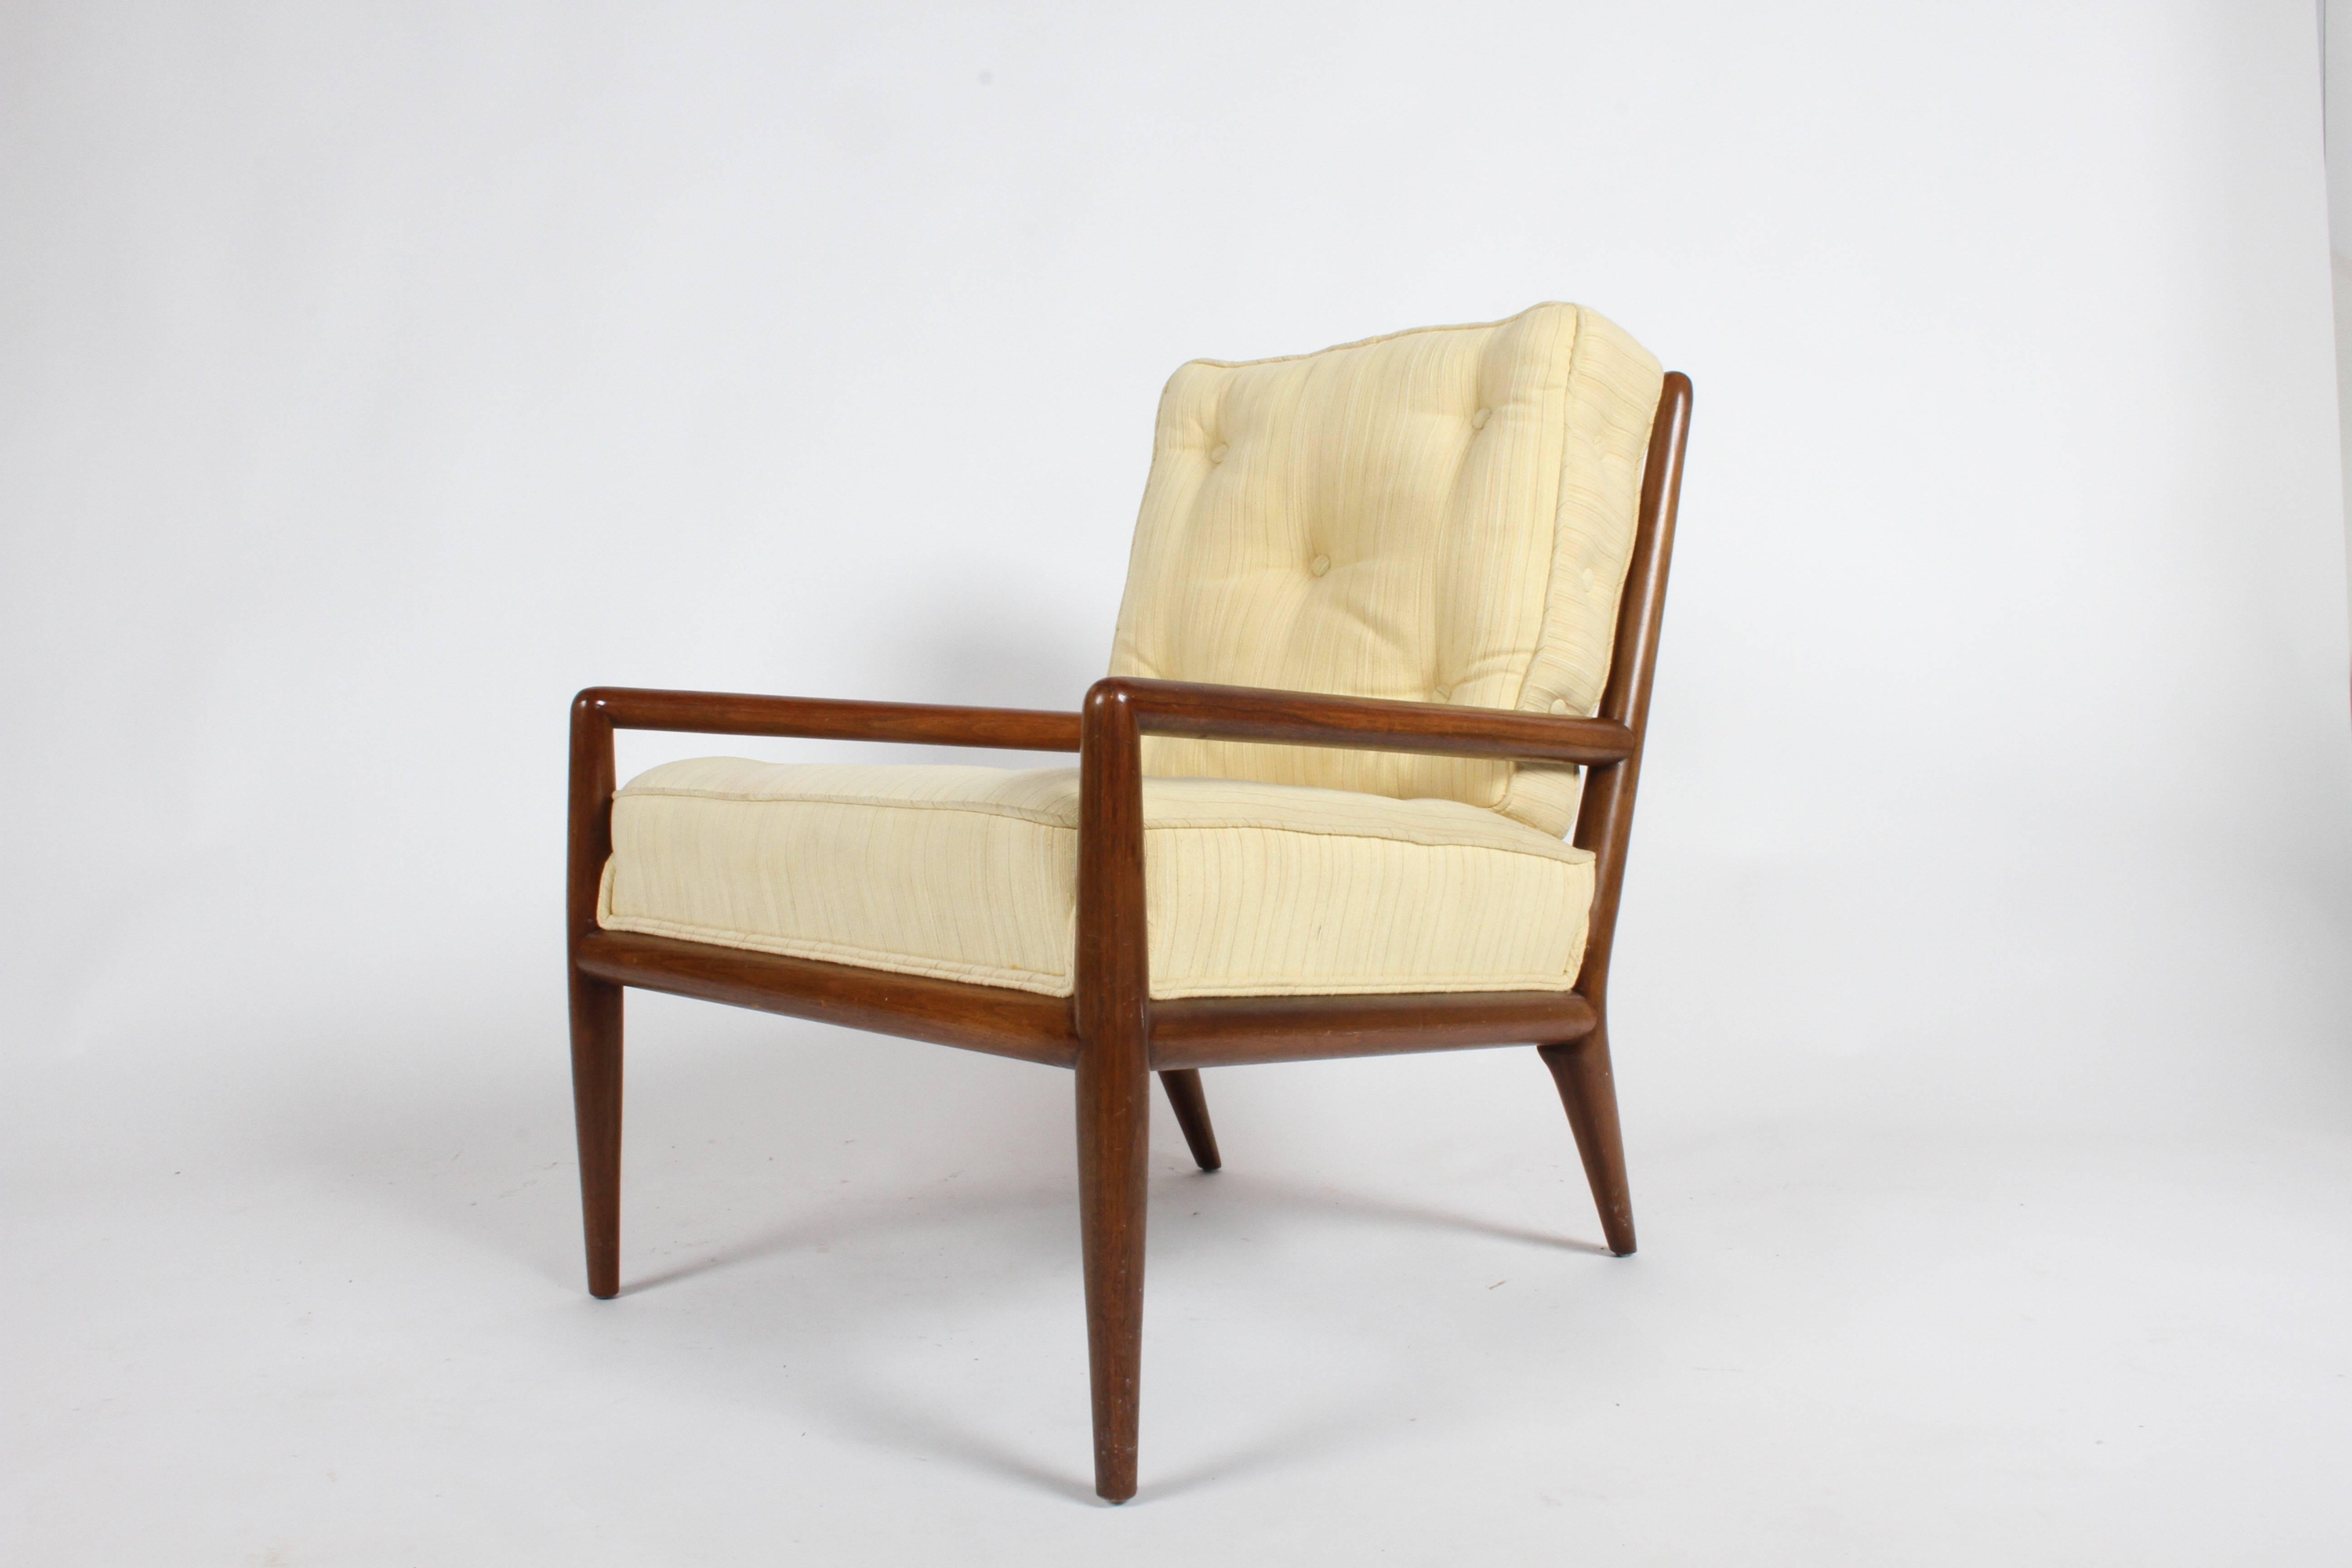 Pair of elegant T.H. Robsjohn-Gibbings for Widdicomb lounge chairs. Walnut frames with original upholstery, note that attached seat cushion is thicker and proper tufting and buttons on side of back cushion as Gibbings originally designed for the